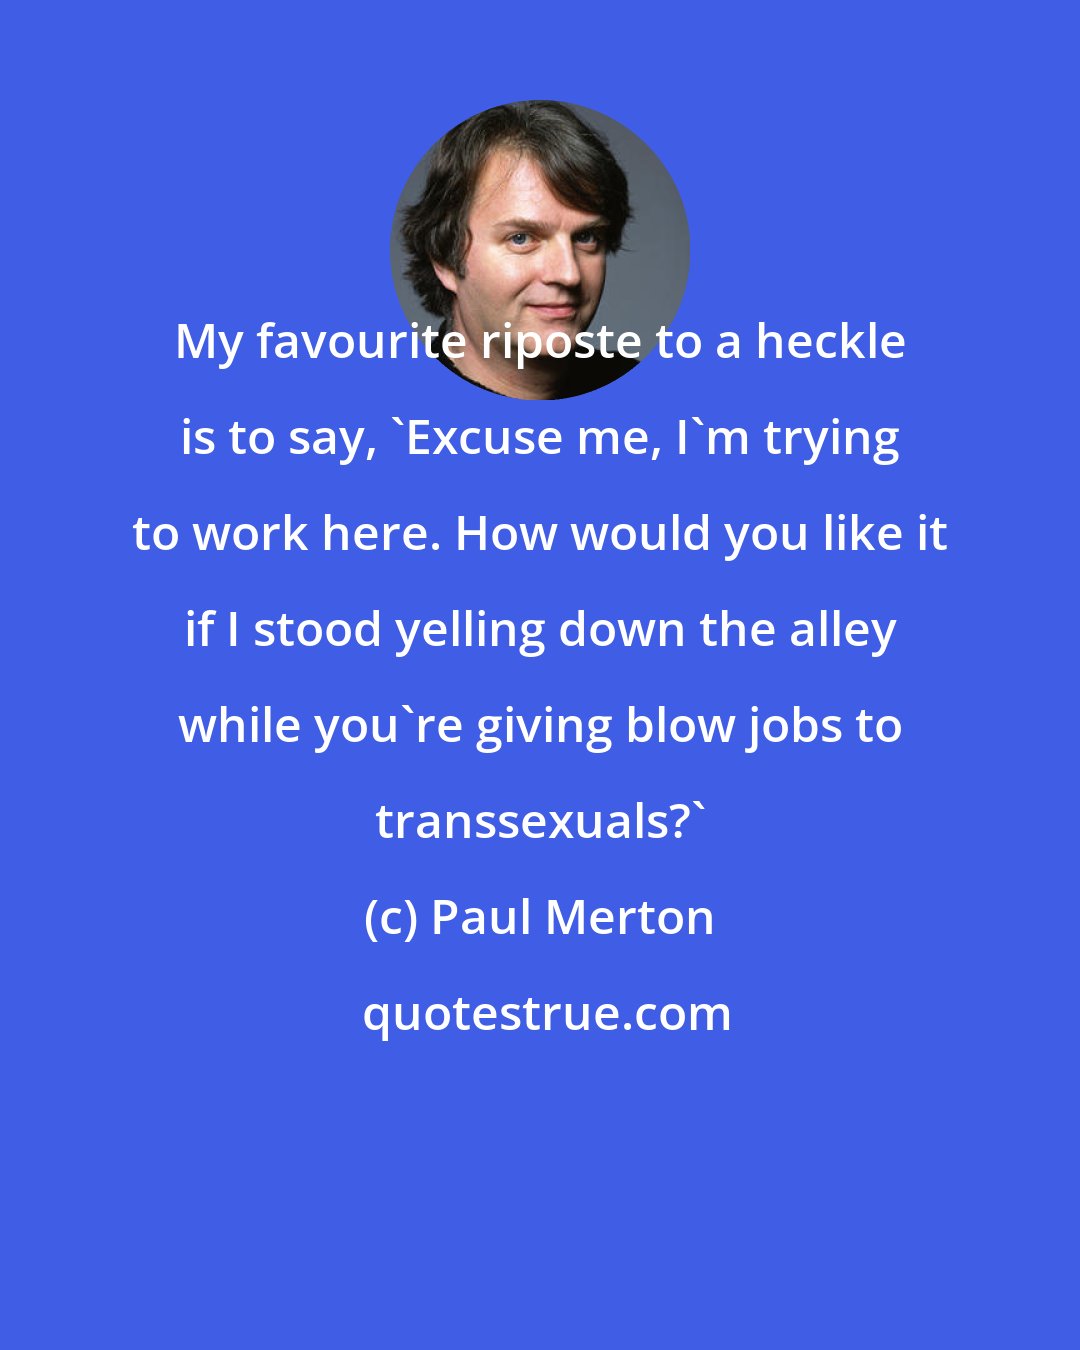 Paul Merton: My favourite riposte to a heckle is to say, 'Excuse me, I'm trying to work here. How would you like it if I stood yelling down the alley while you're giving blow jobs to transsexuals?'